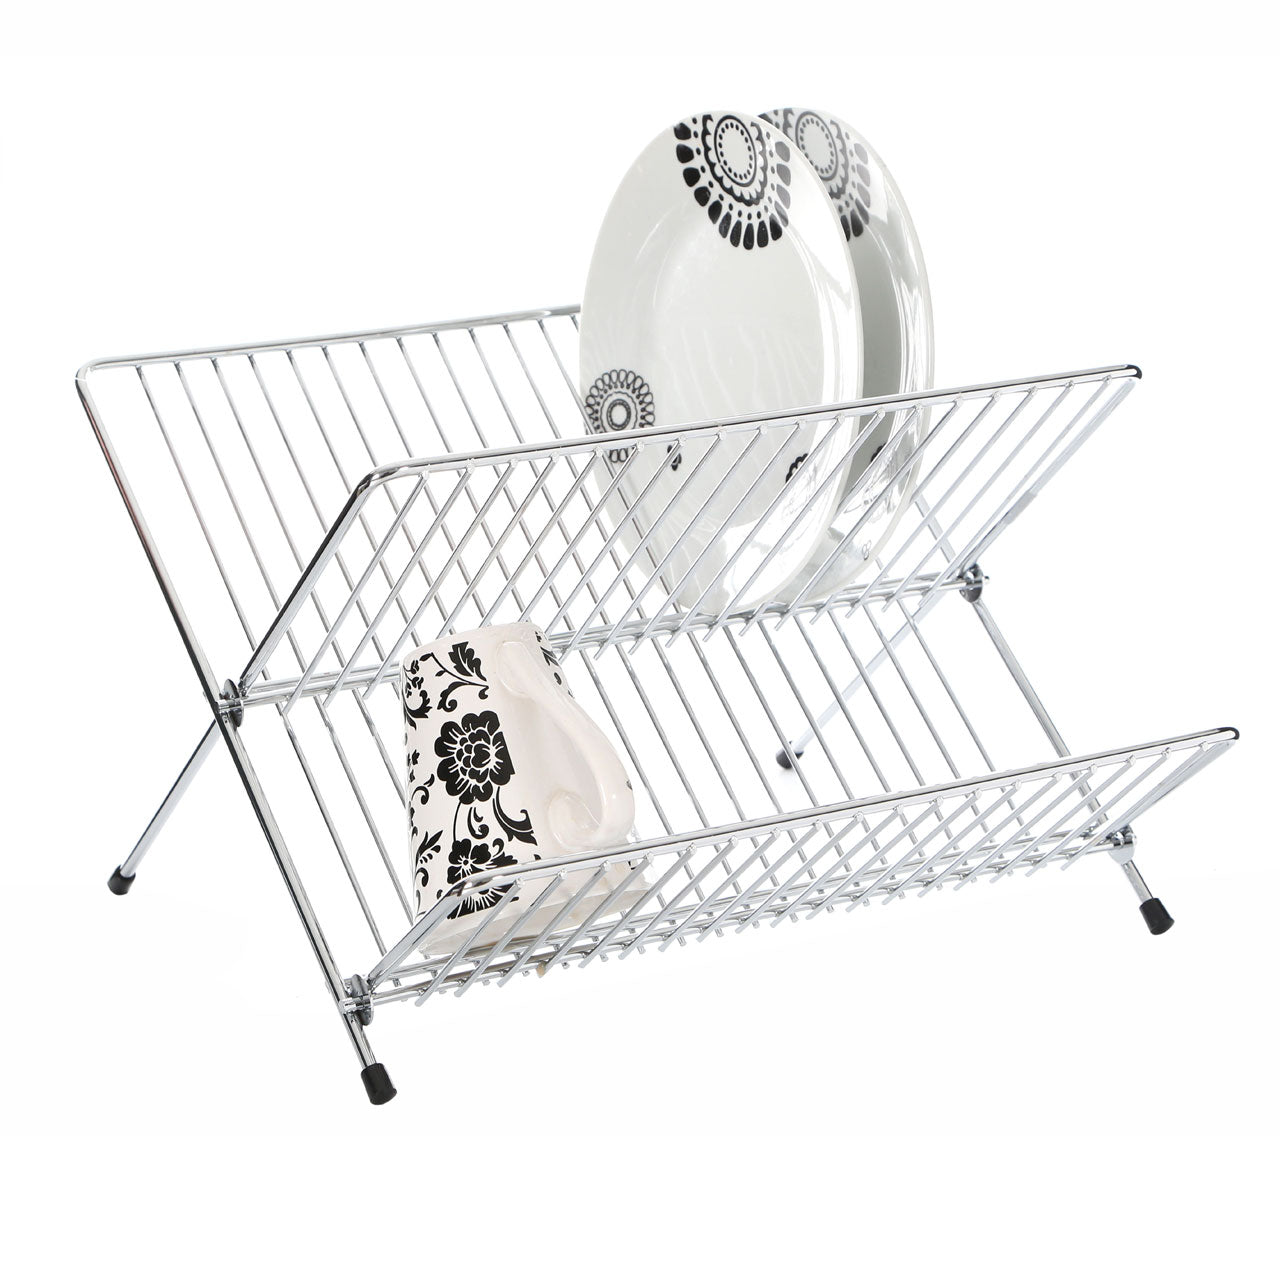 Folding Stainless Steel Dish Drainer